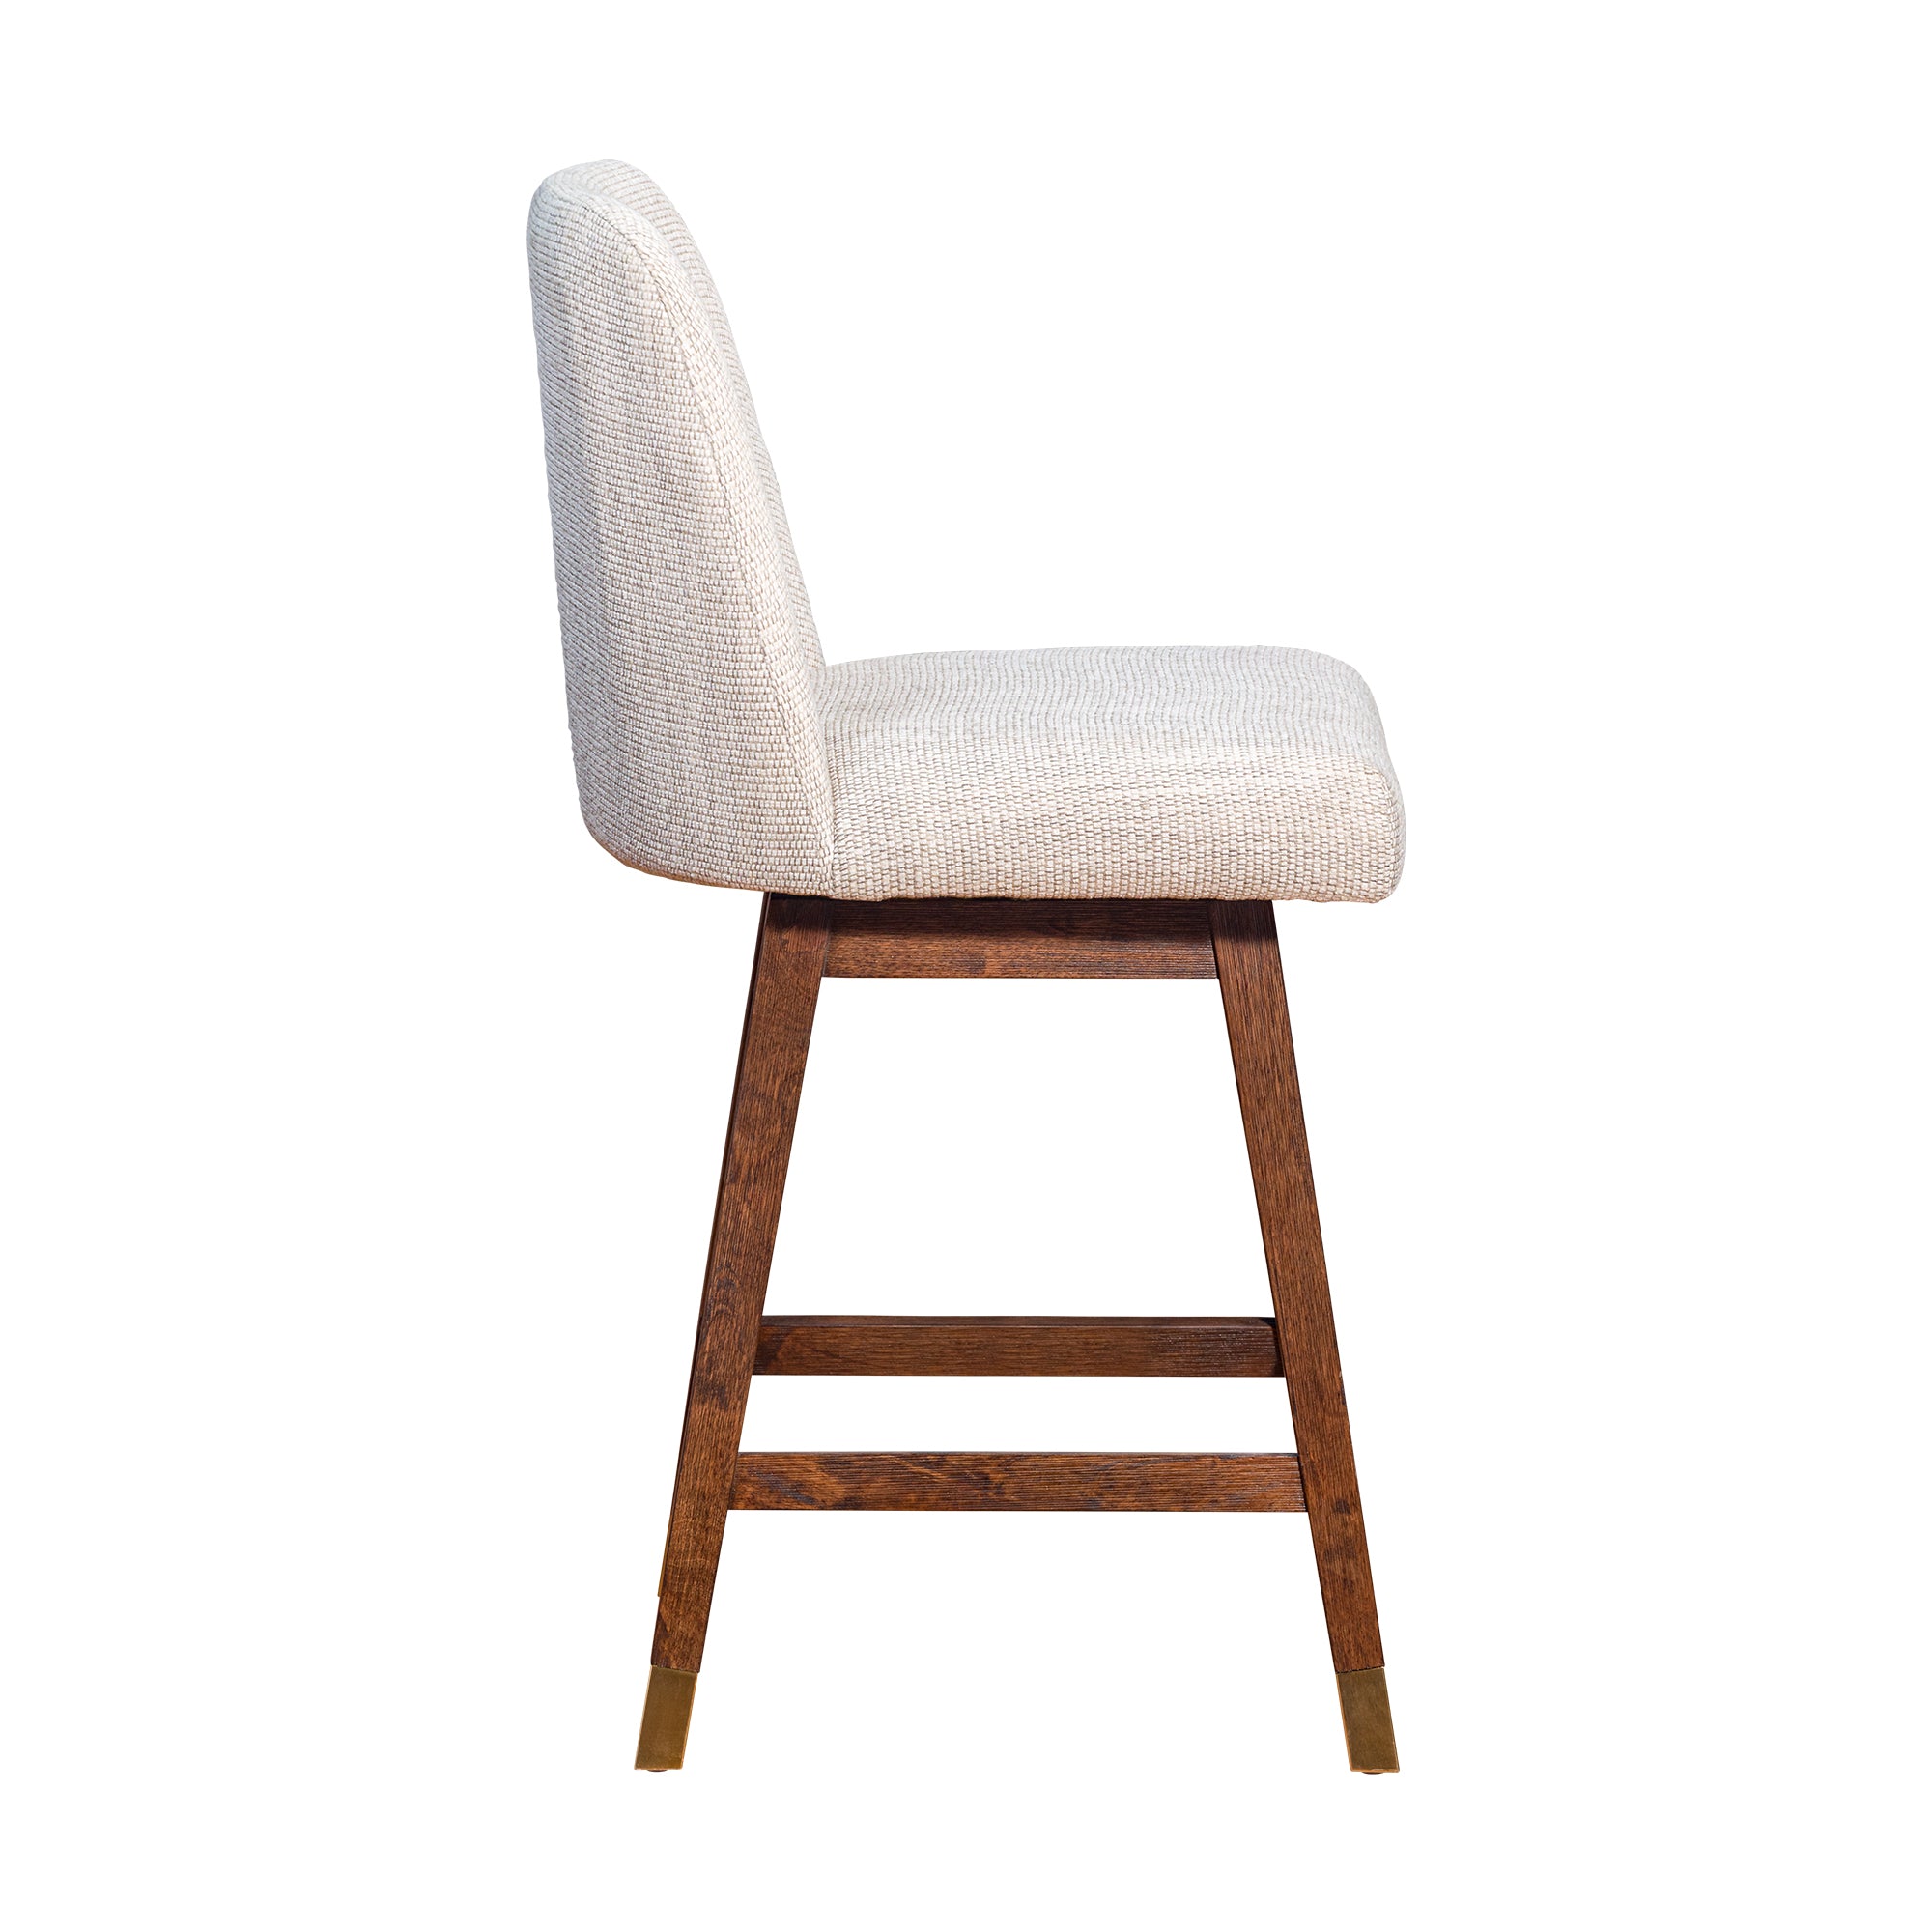 Armen Living - Amalie Swivel Bar or Counter Stool in Brown Oak Wood Finish with Beige Fabric - 840254332072